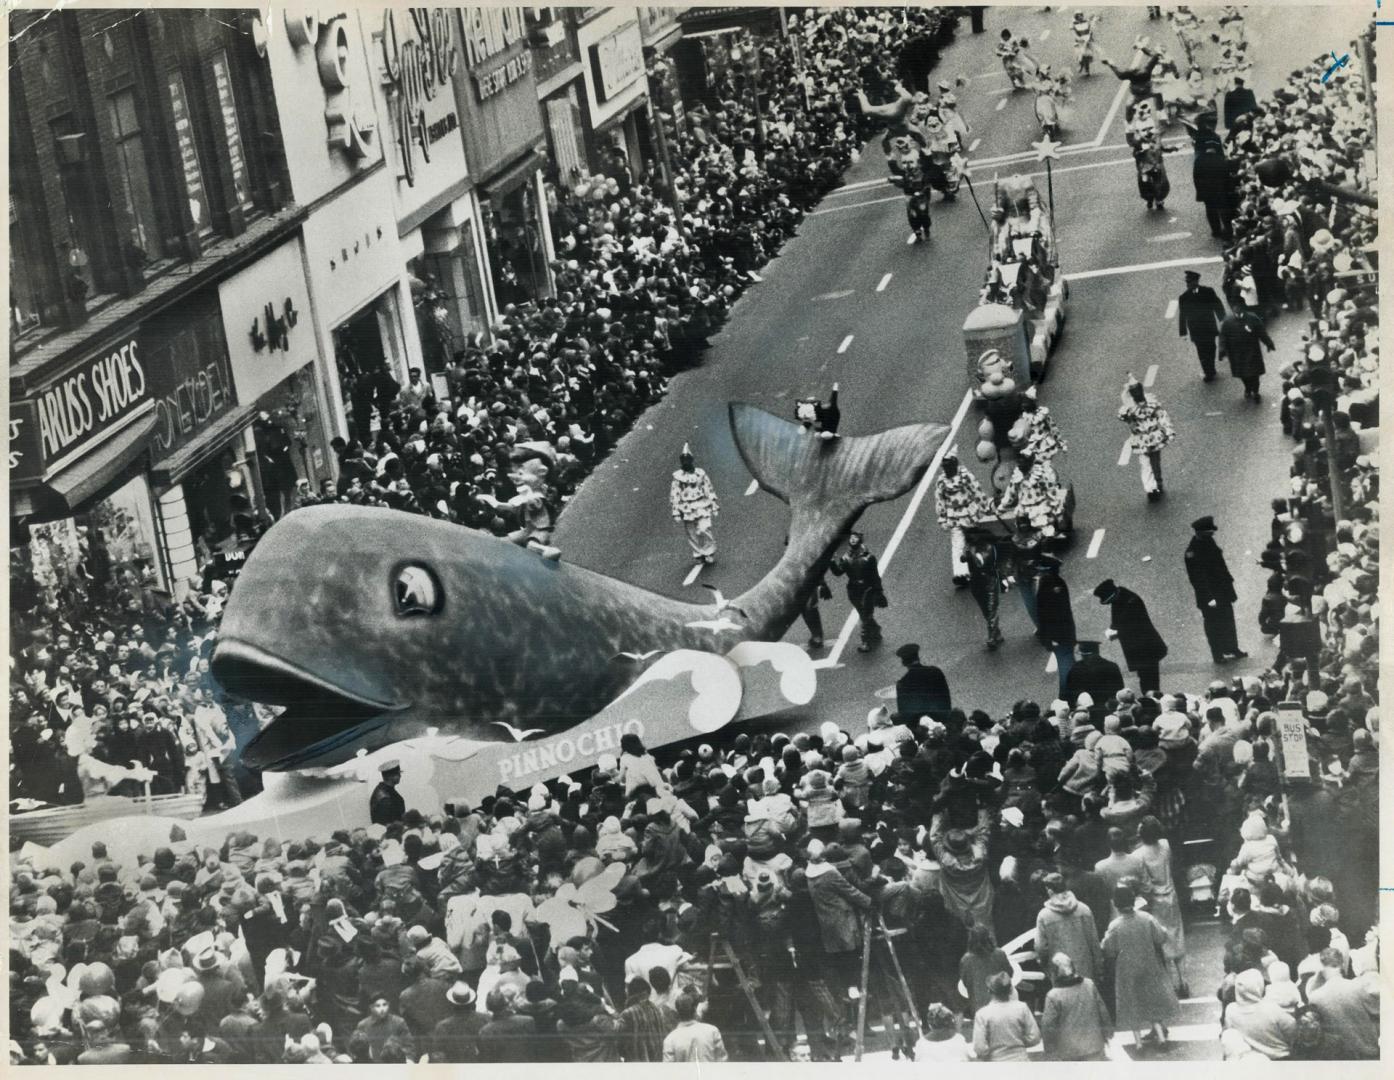 Pinnochio float makes a whale of a hit as it travels downtown streets